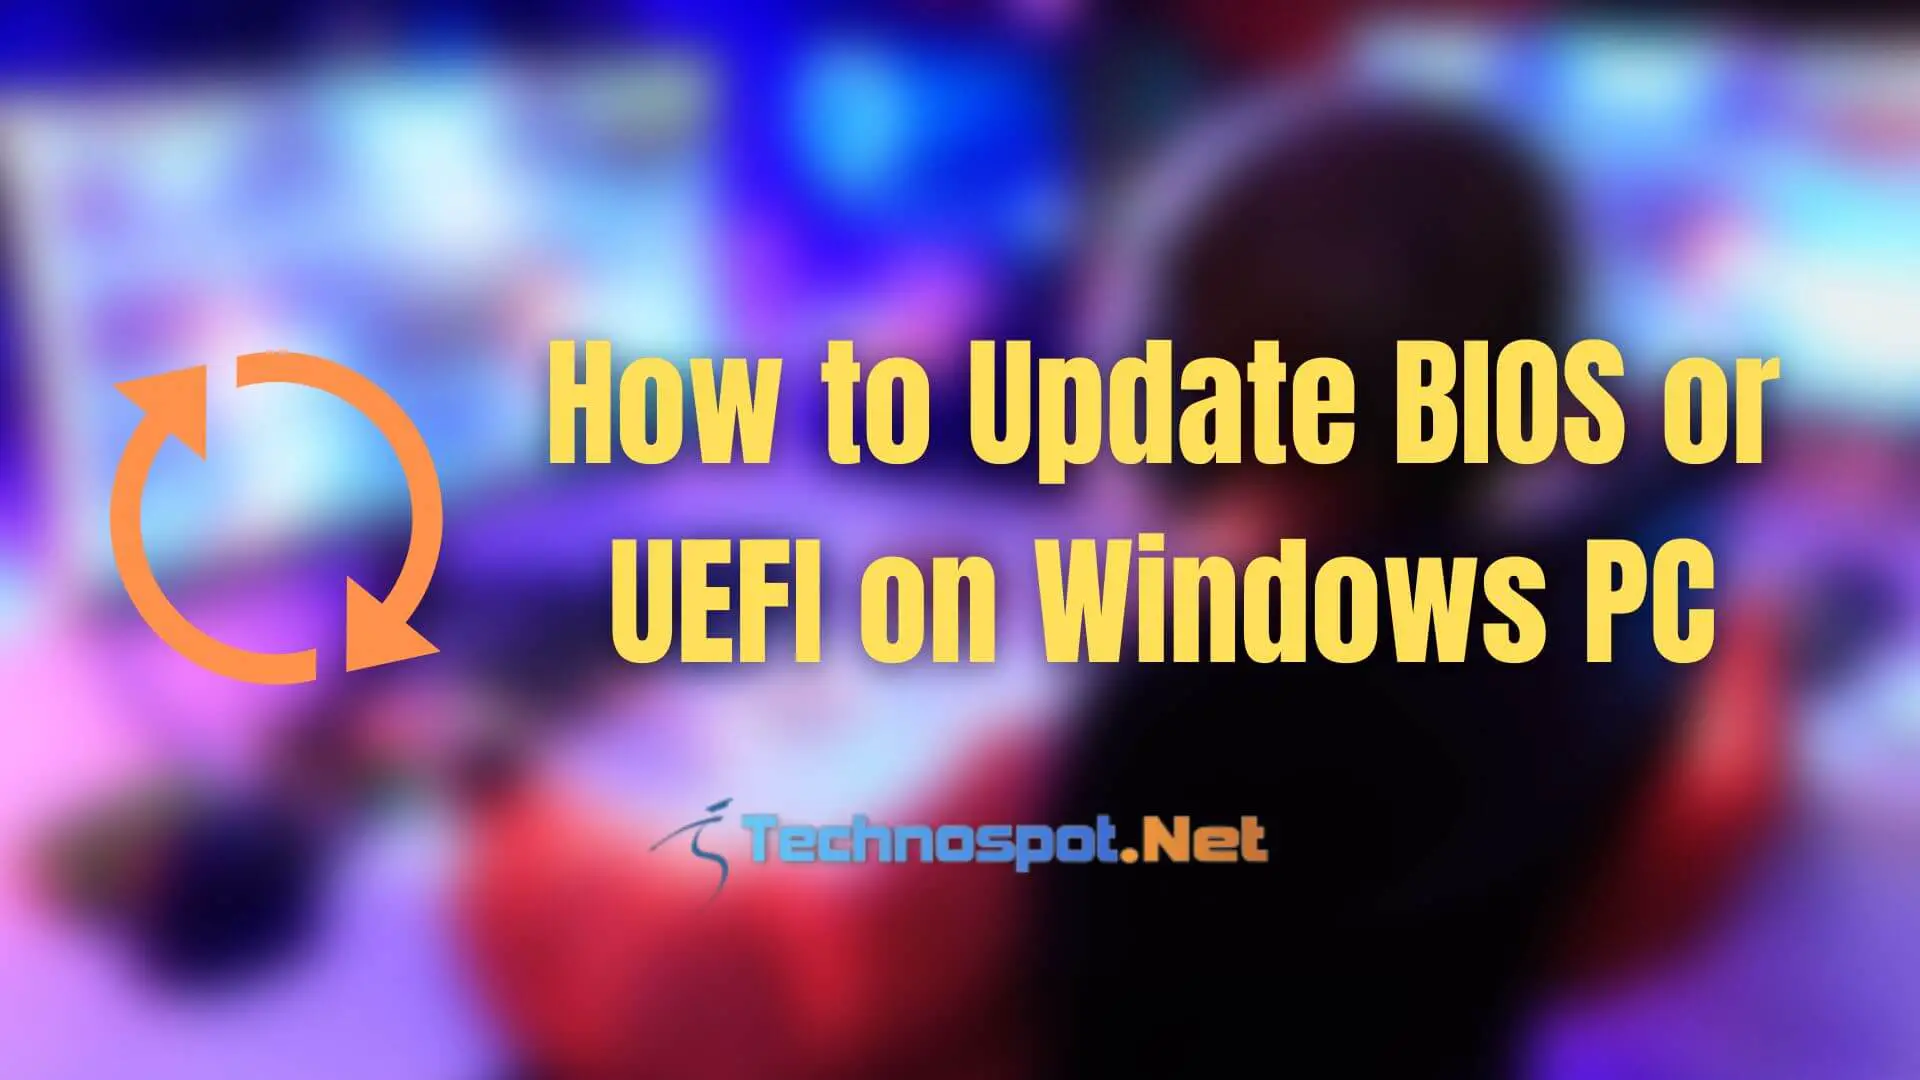 How to Update BIOS or UEFI on Windows PC